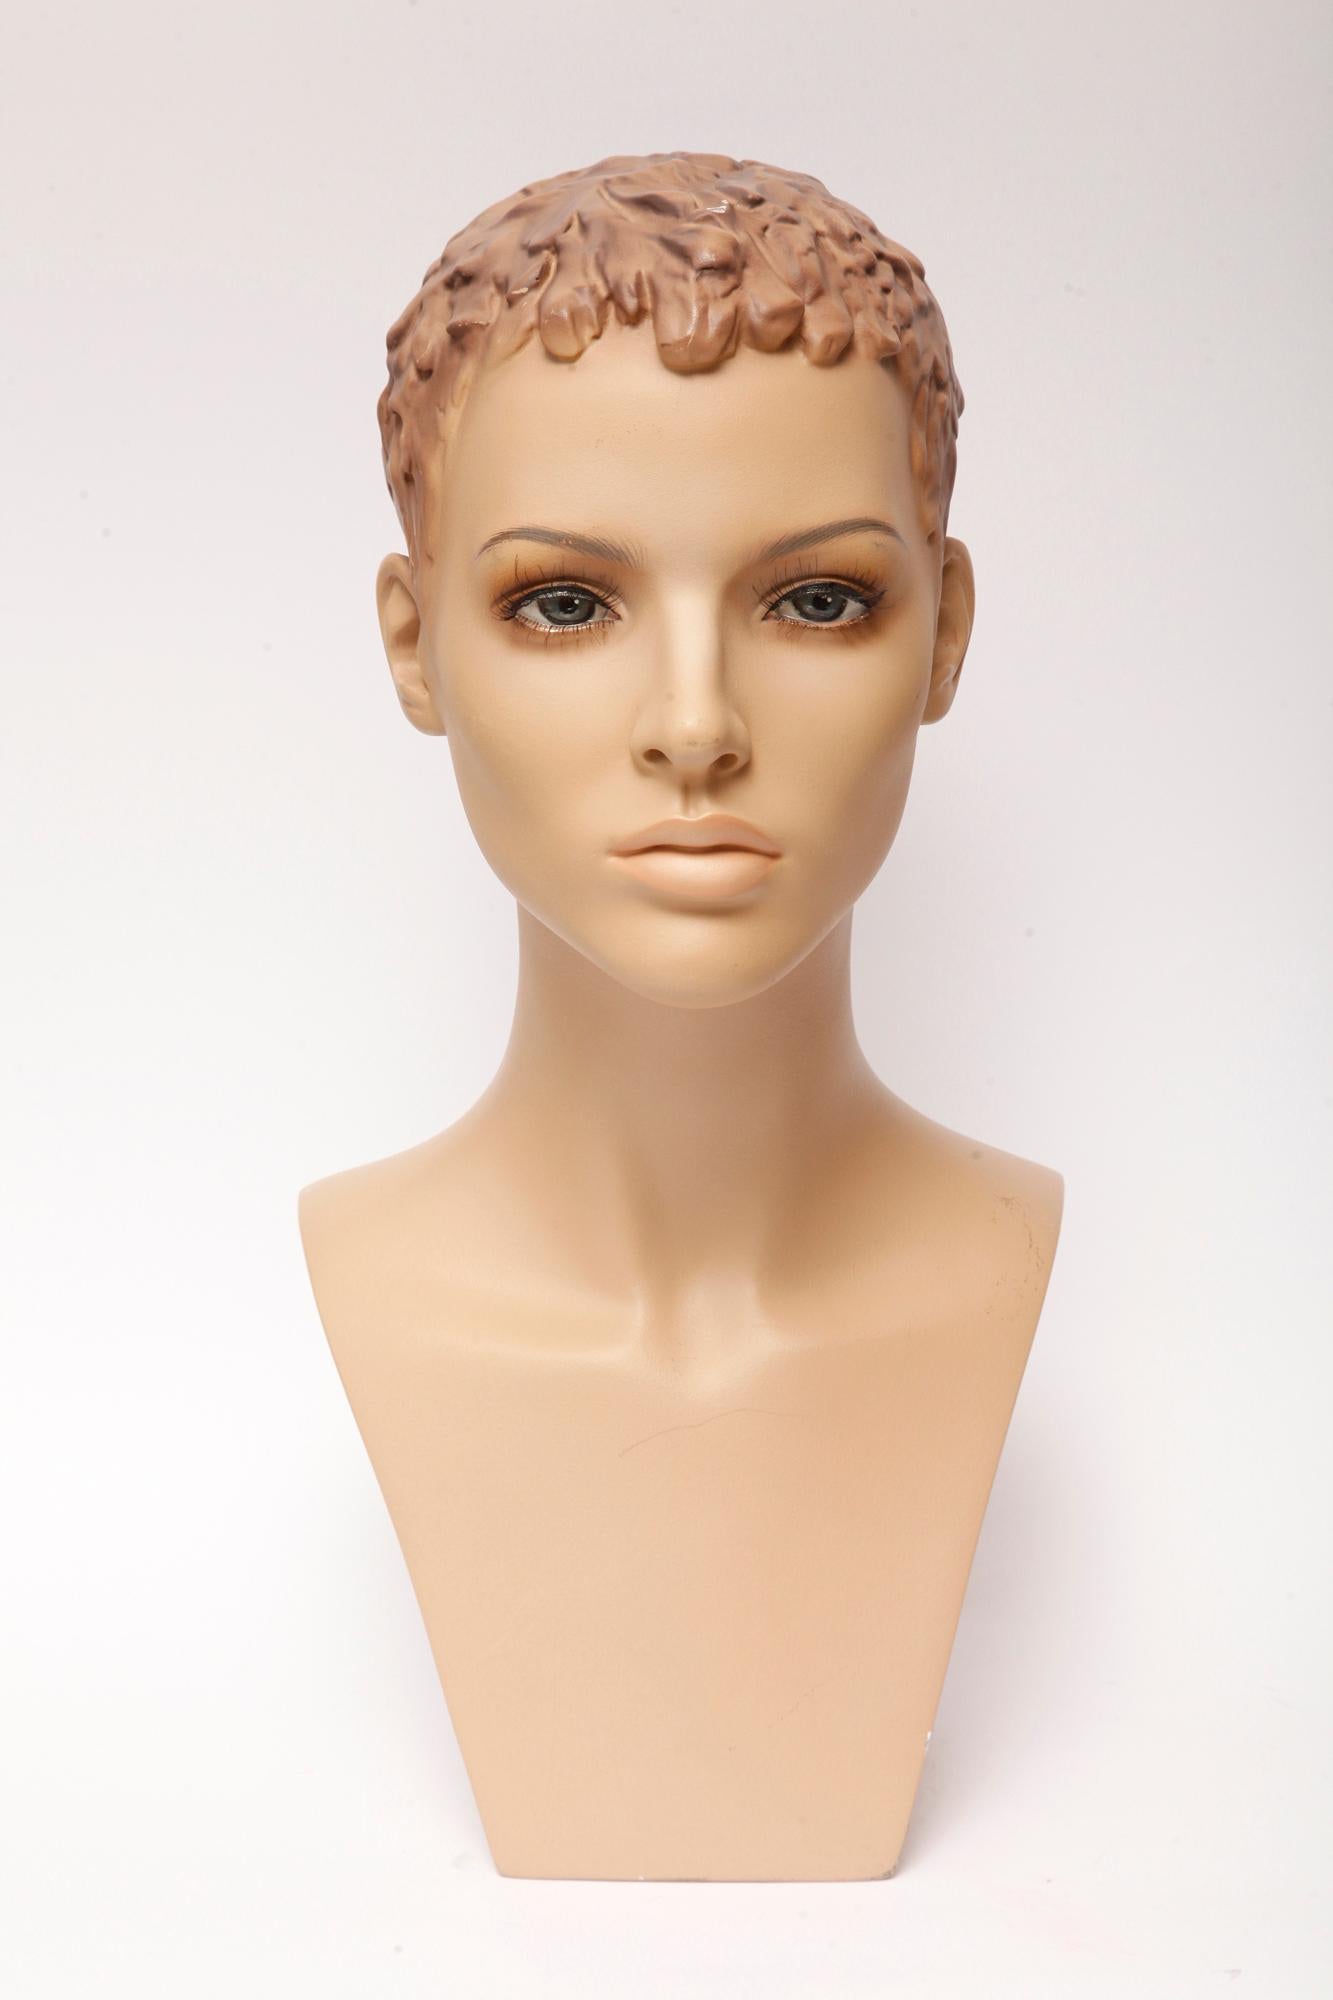 Women's realistic, advertising mannequin, bust used to display necklaces. Extremely realistic, meticulously finished in black ink, with realistic eyes, eyebrows and eyelashes. In excellent condition for its age, with a few minor gypsum defects at